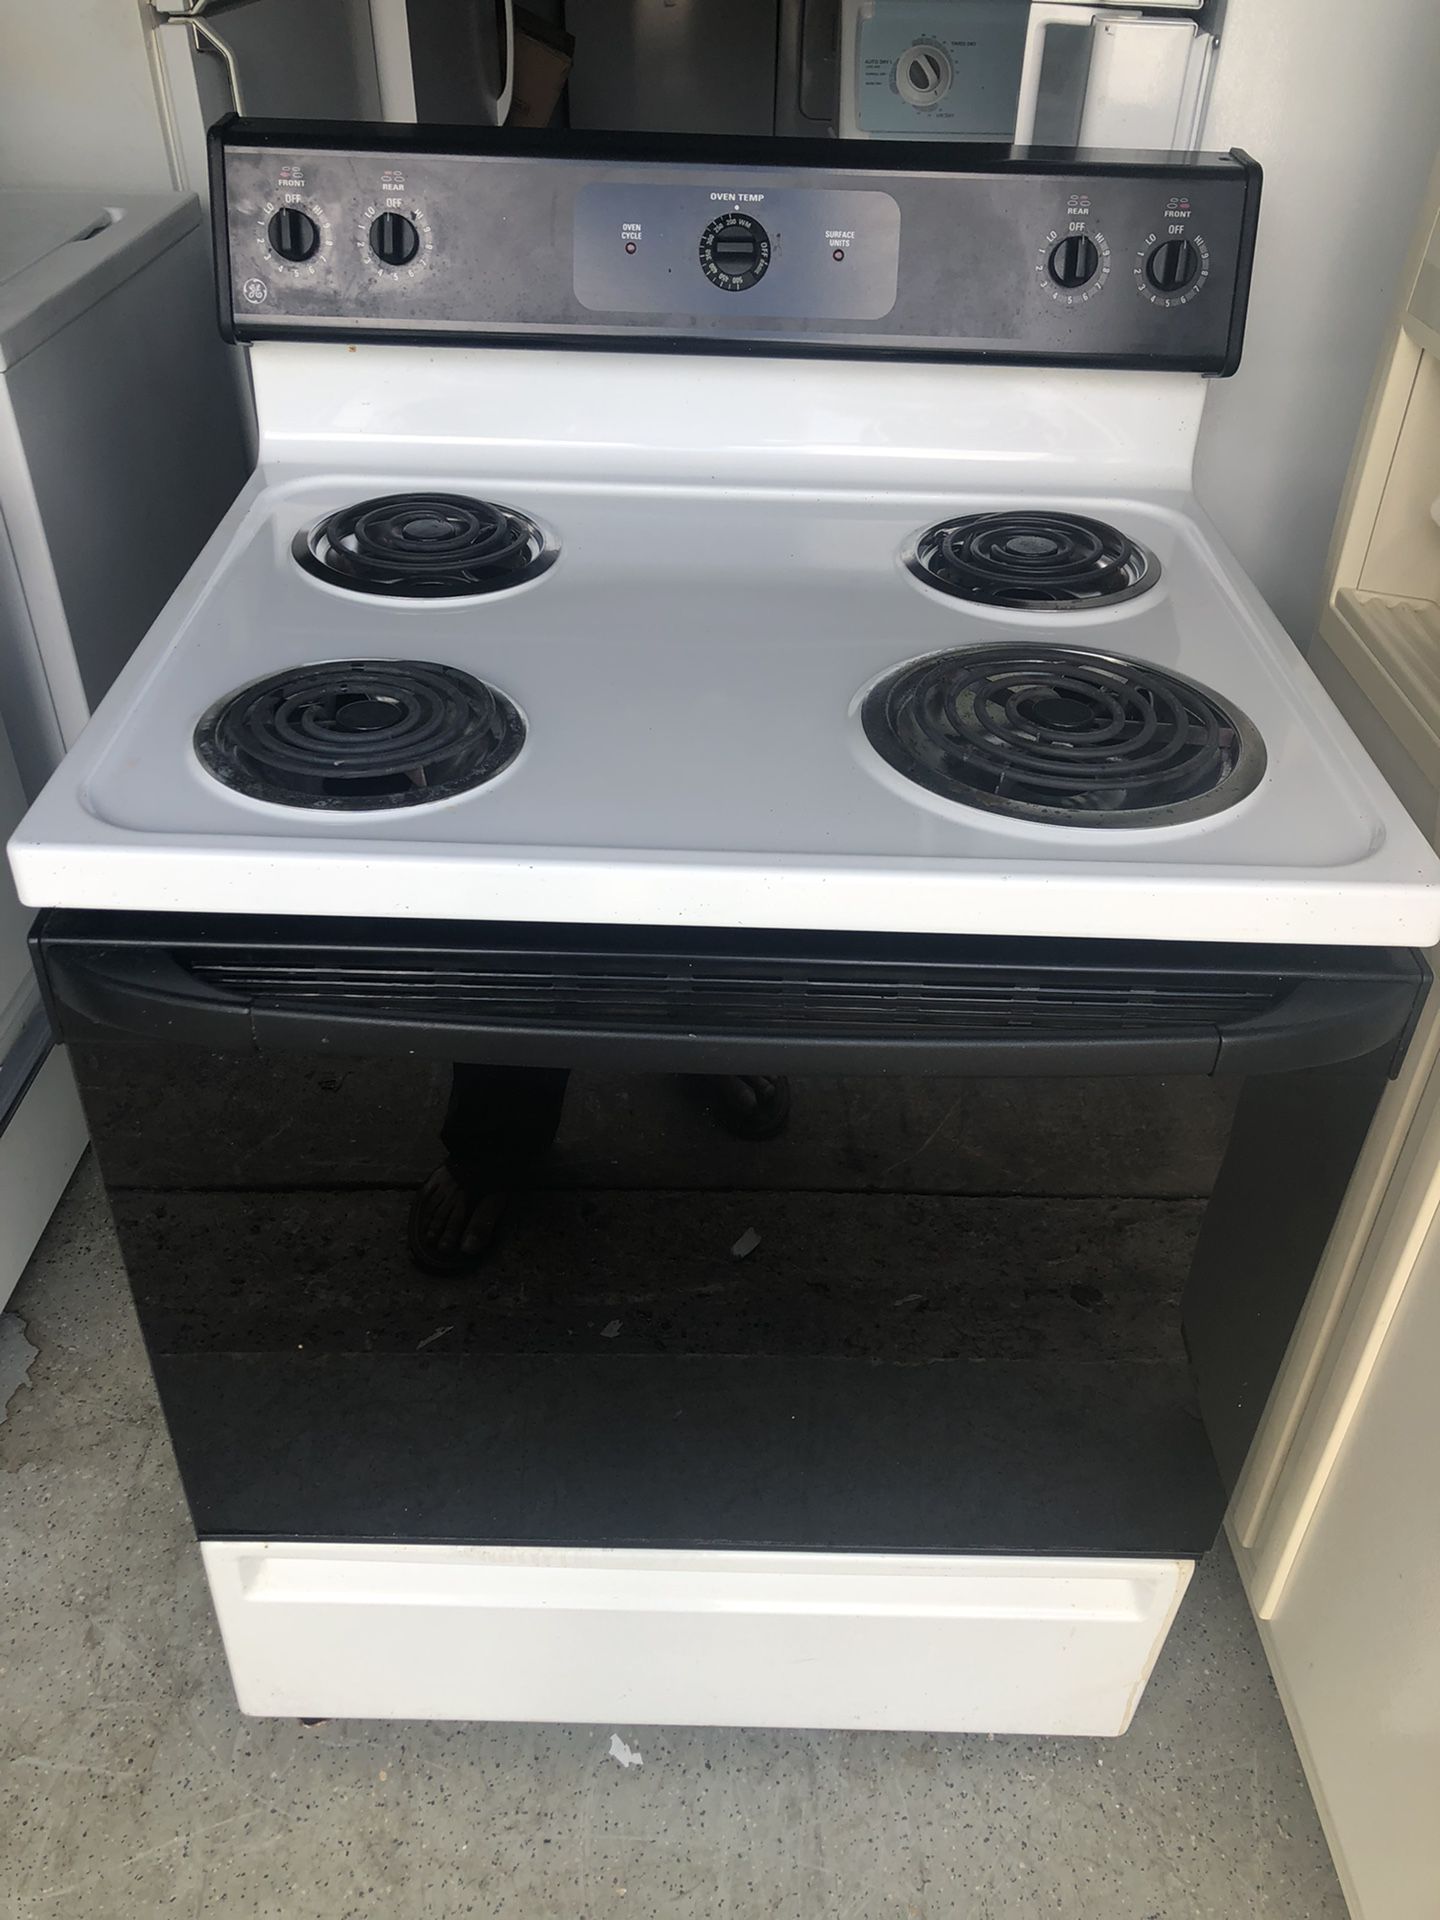 Refrigerators Hi 65 Wid 29 and Electric Stove All Working Perfect $400